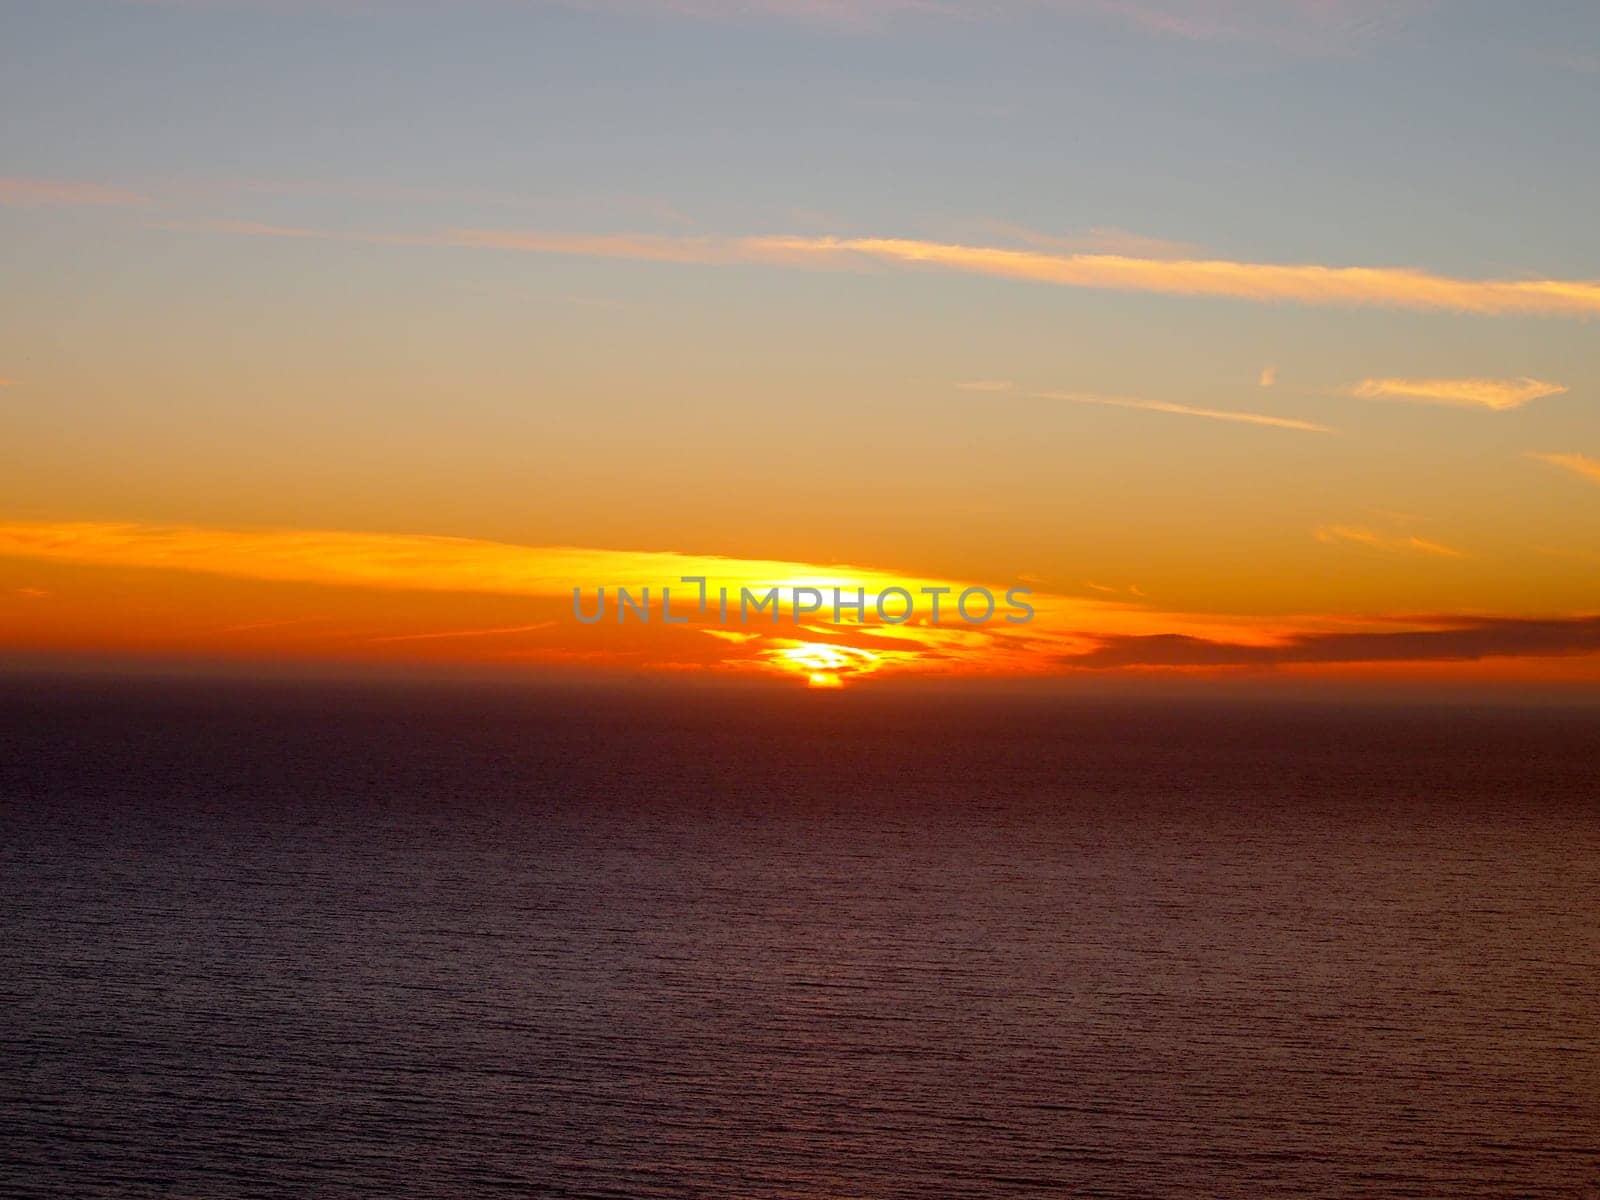 A beautiful sunset over the Pacific Ocean in California